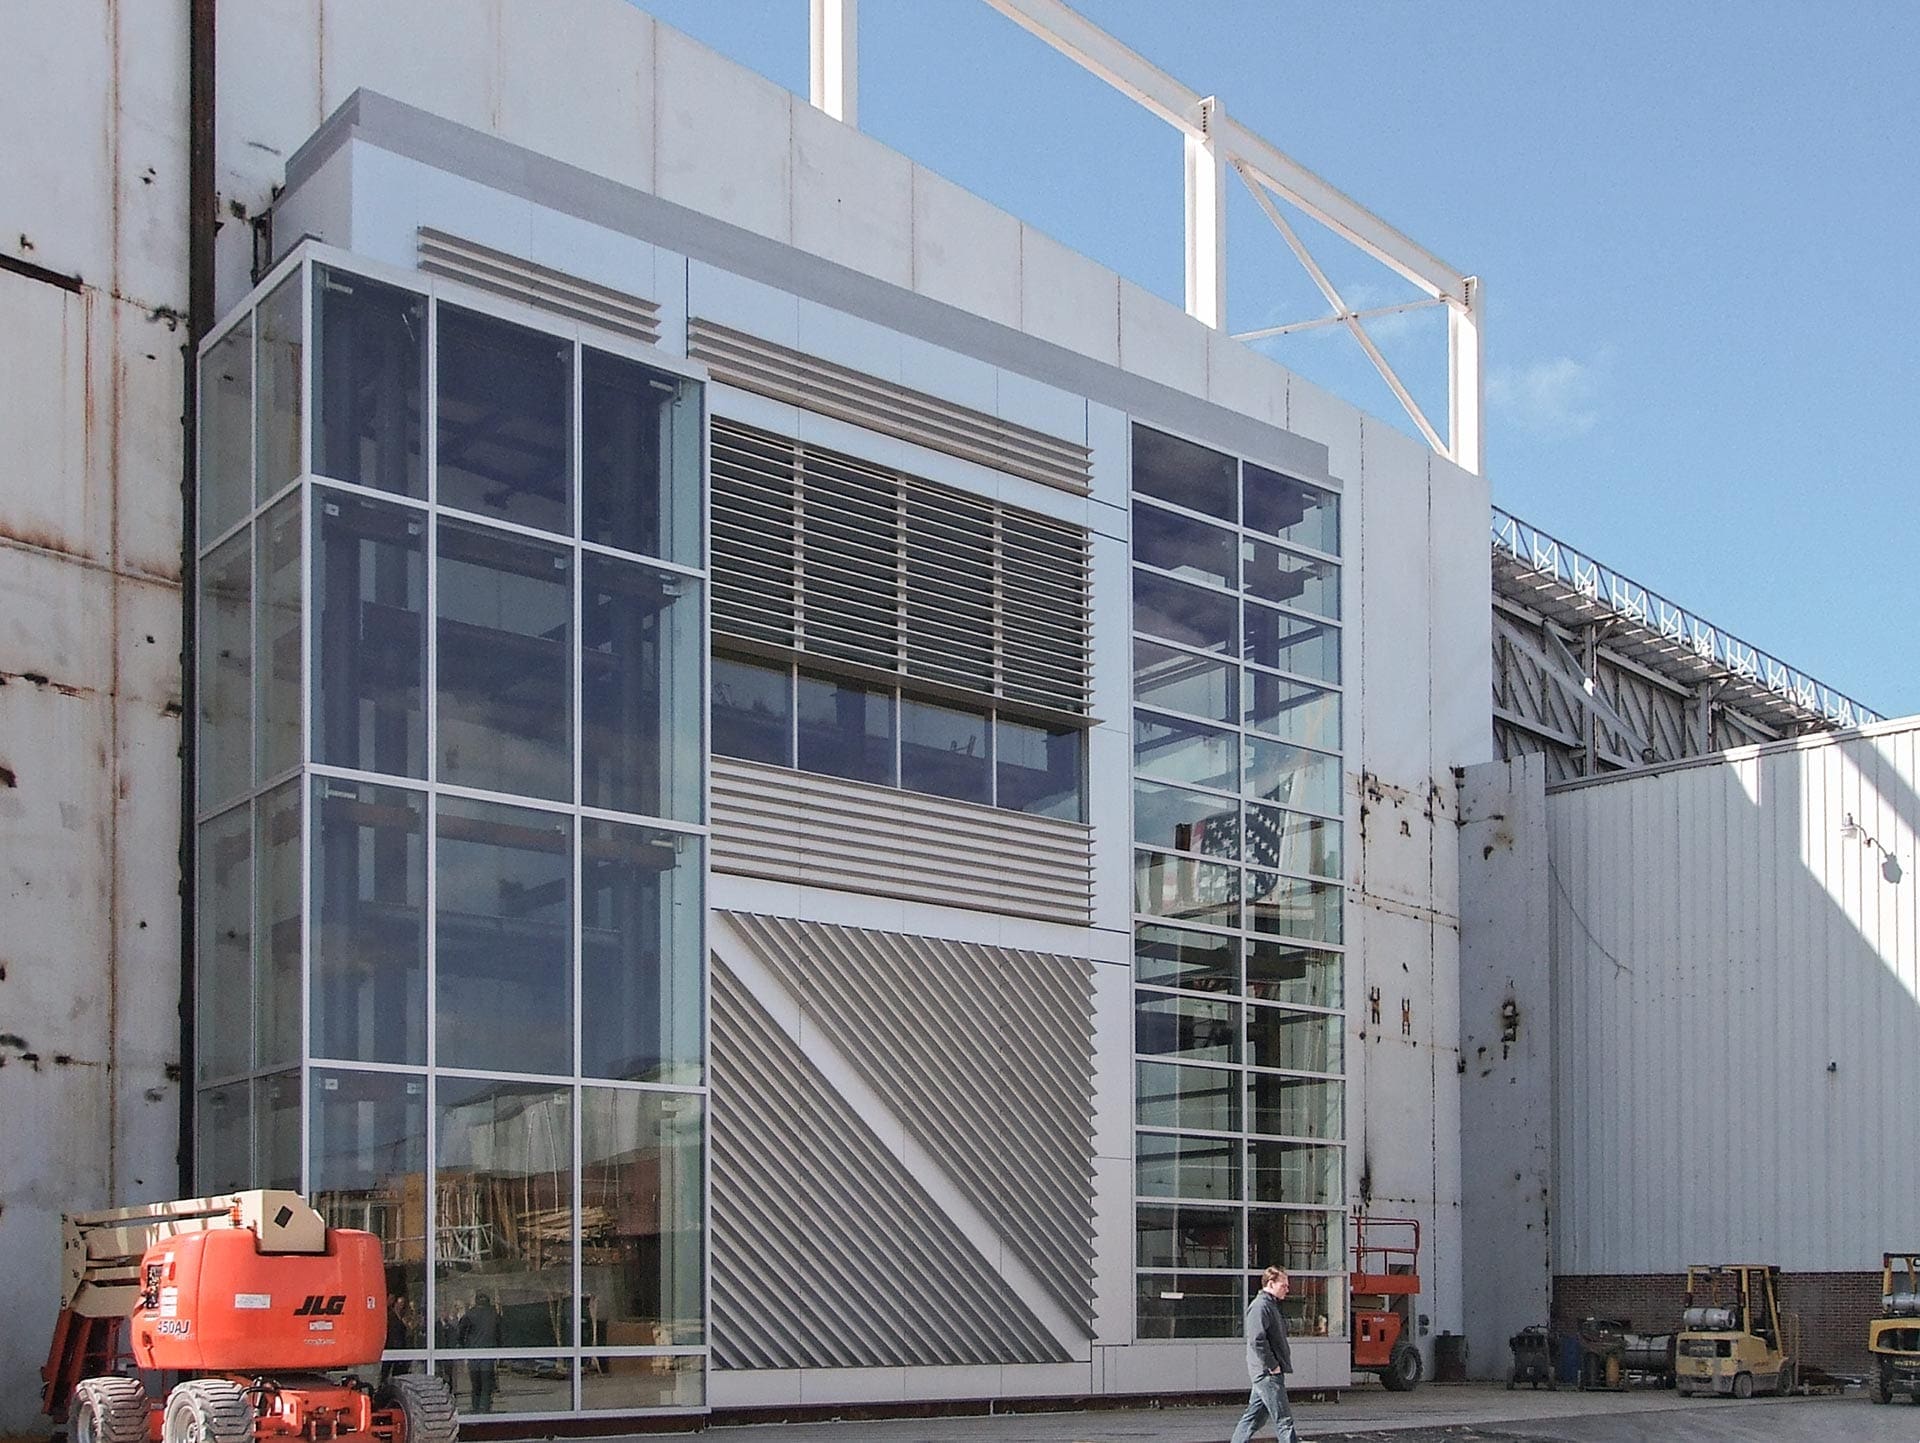 Zahner-produced mockup for wind-testing the Columbia facade system.